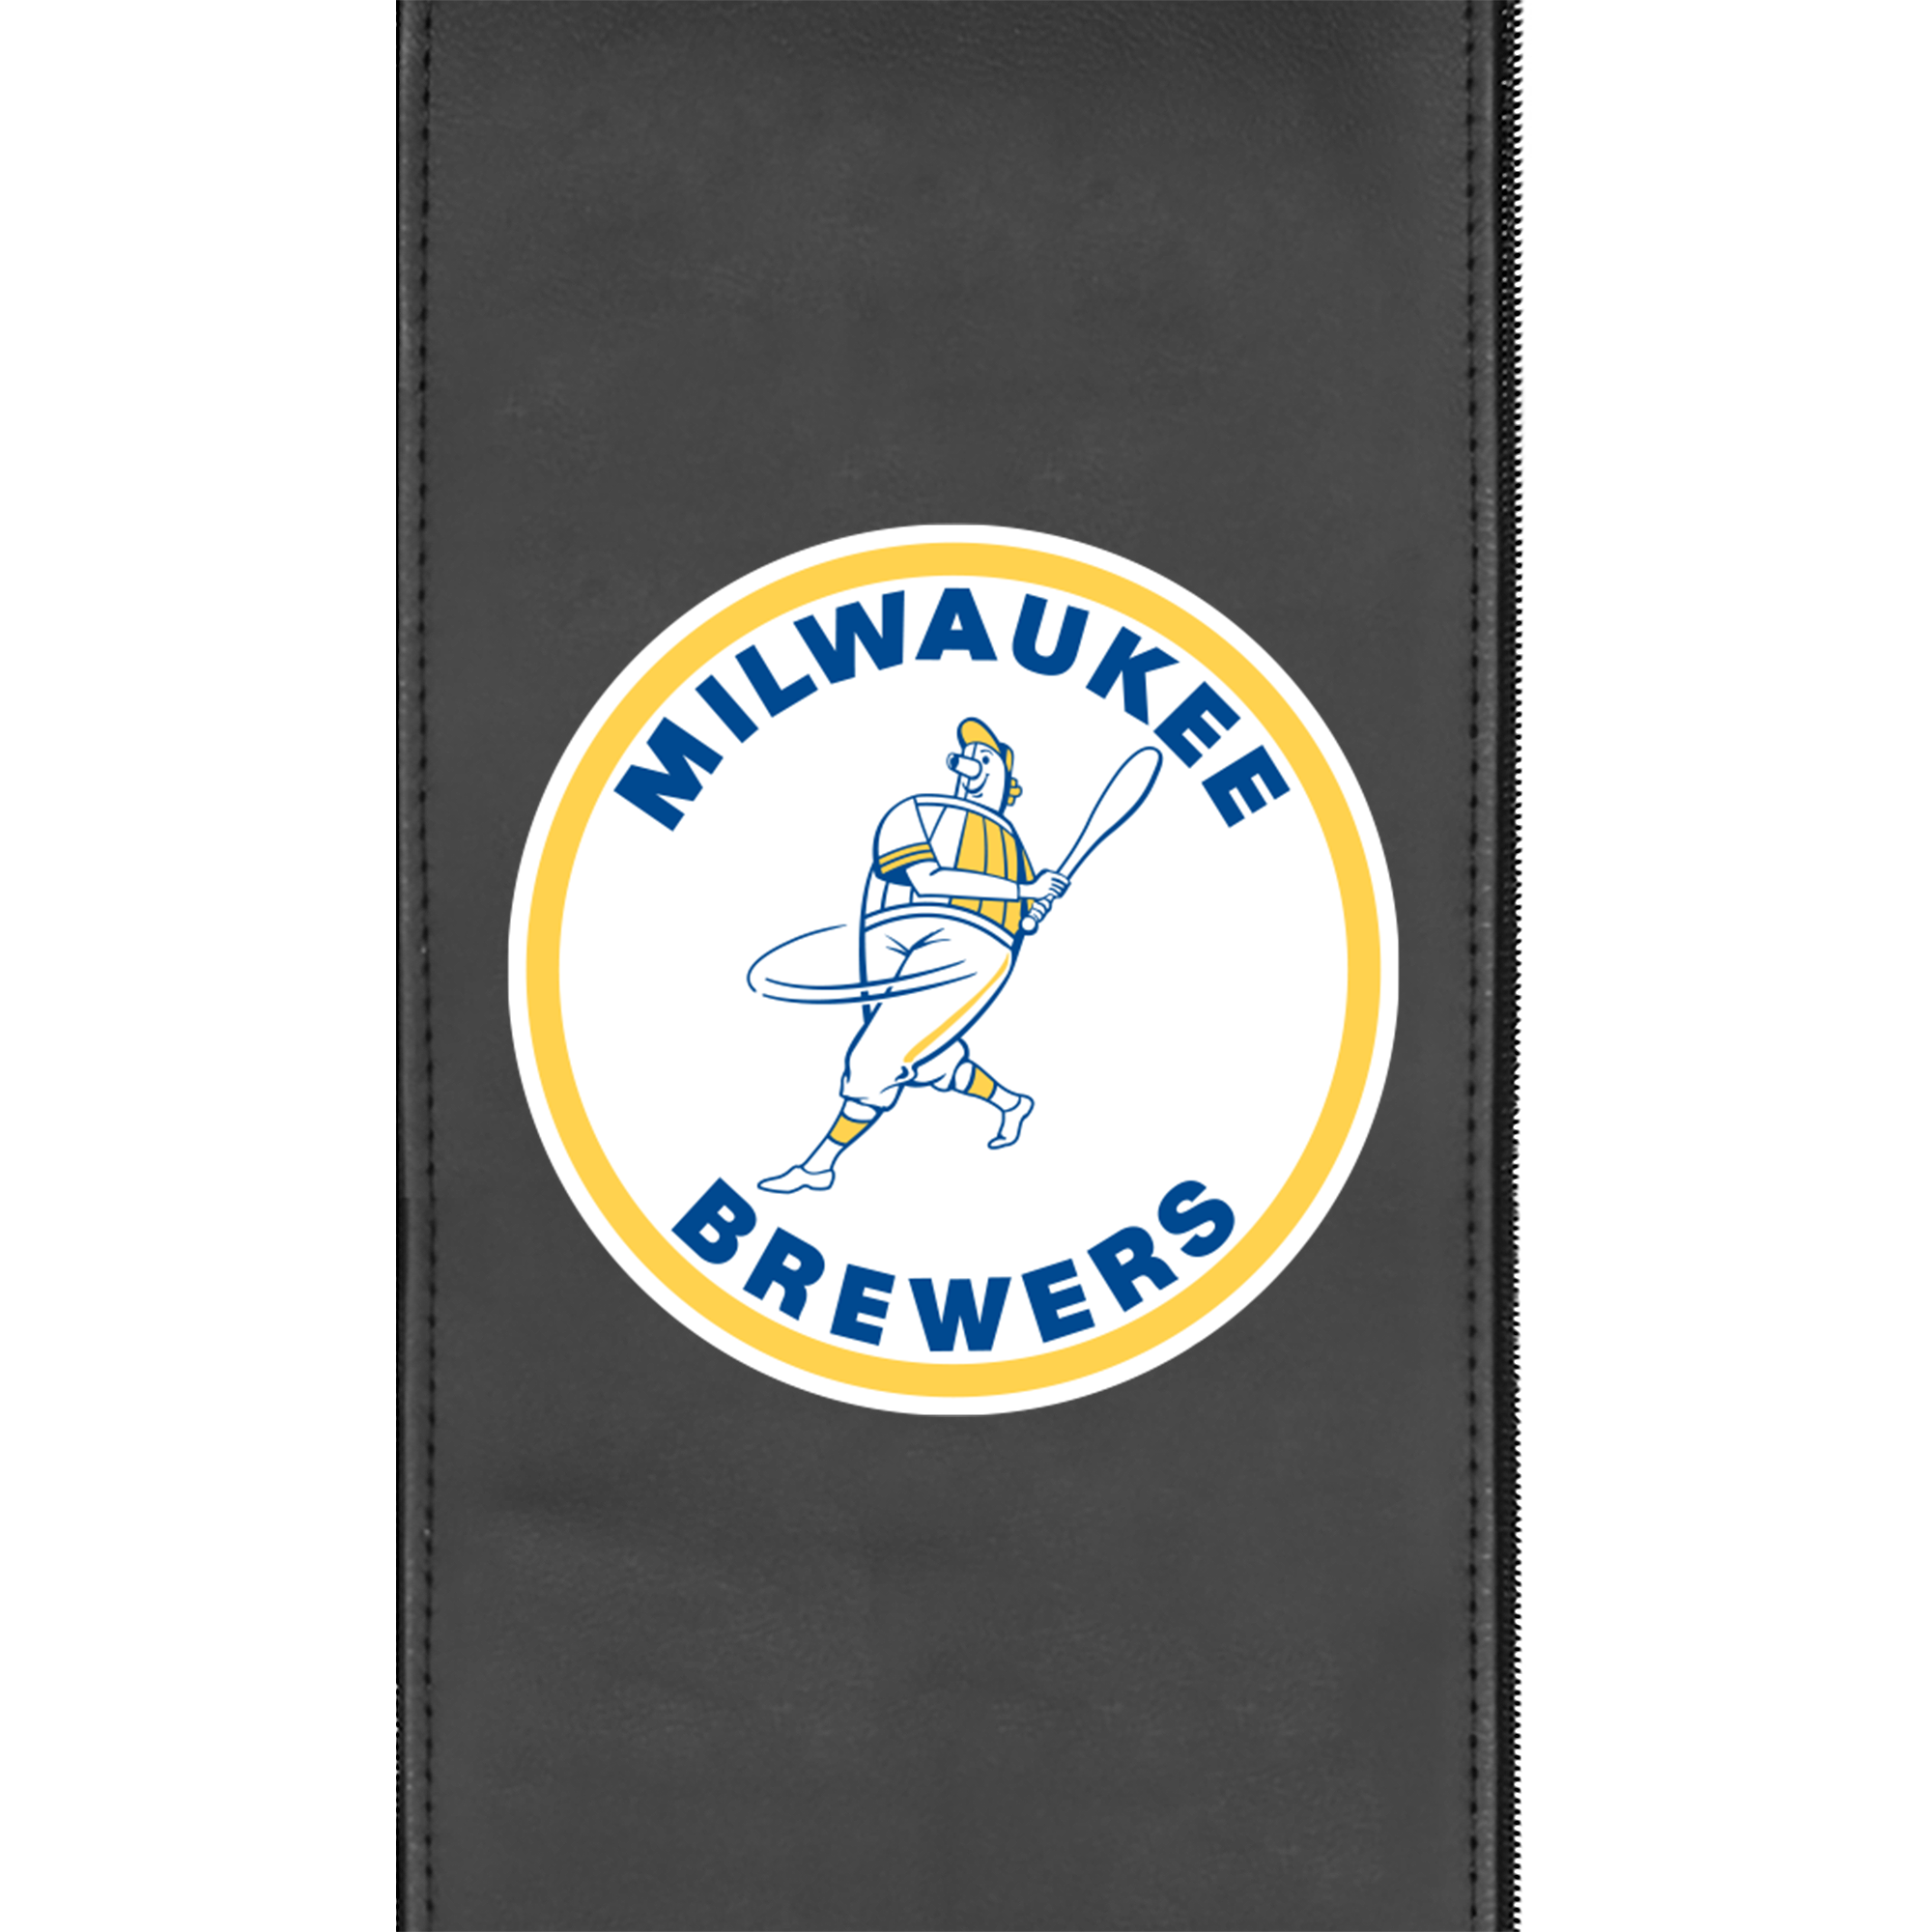 SuiteMax 3.5 VIP Seats with Milwaukee Brewers Cooperstown Primary Logo